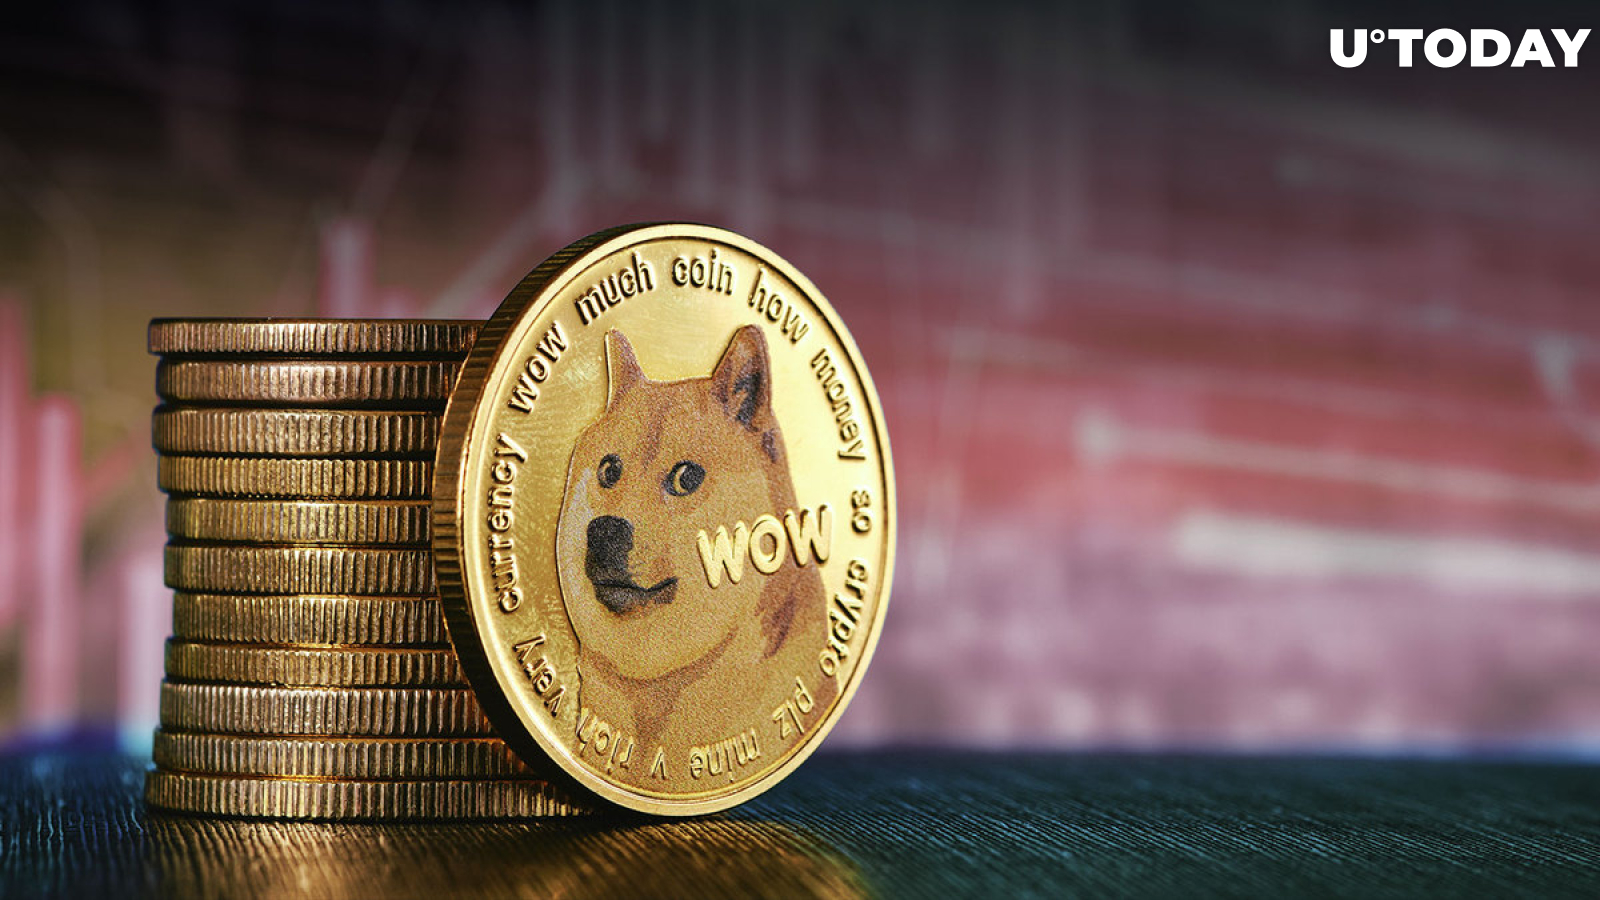 Hundreds of Millions of DOGE Dumped as Dogecoin Miners Cash Out